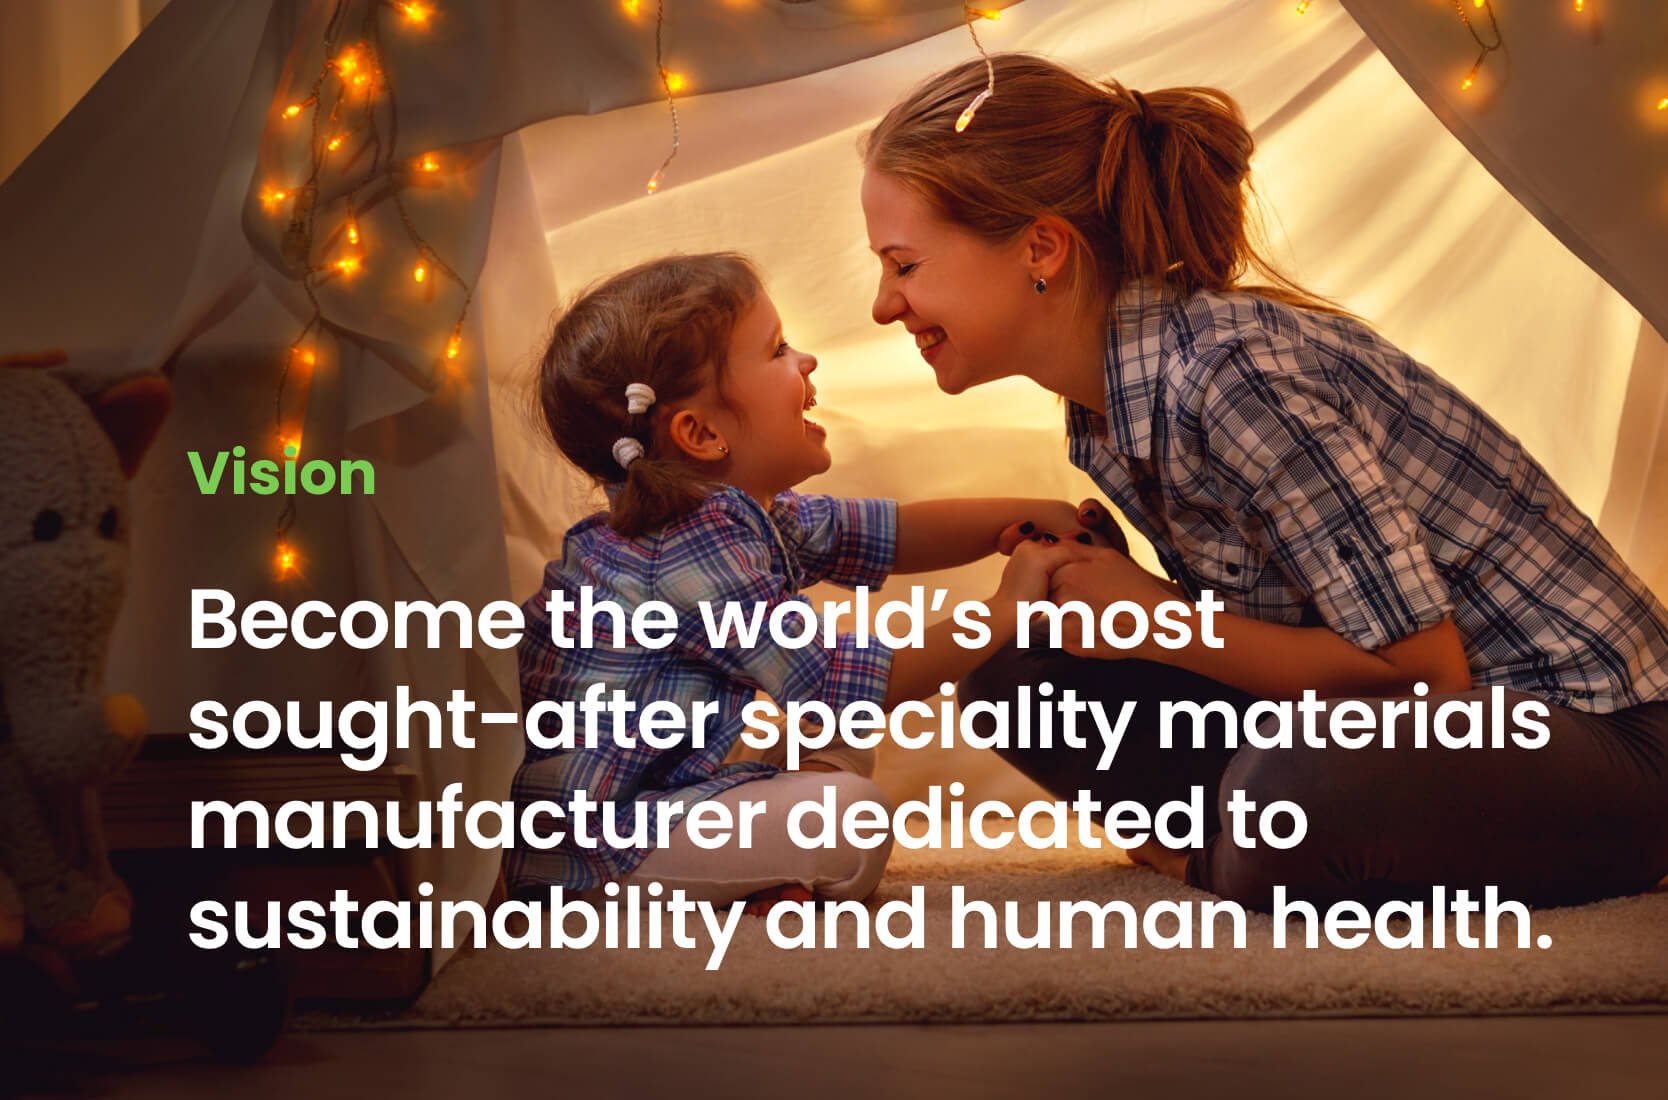 Alkegen Vision: Become the world's most sought-after speciality materials manufacturer dedicated to sustainability and human health.